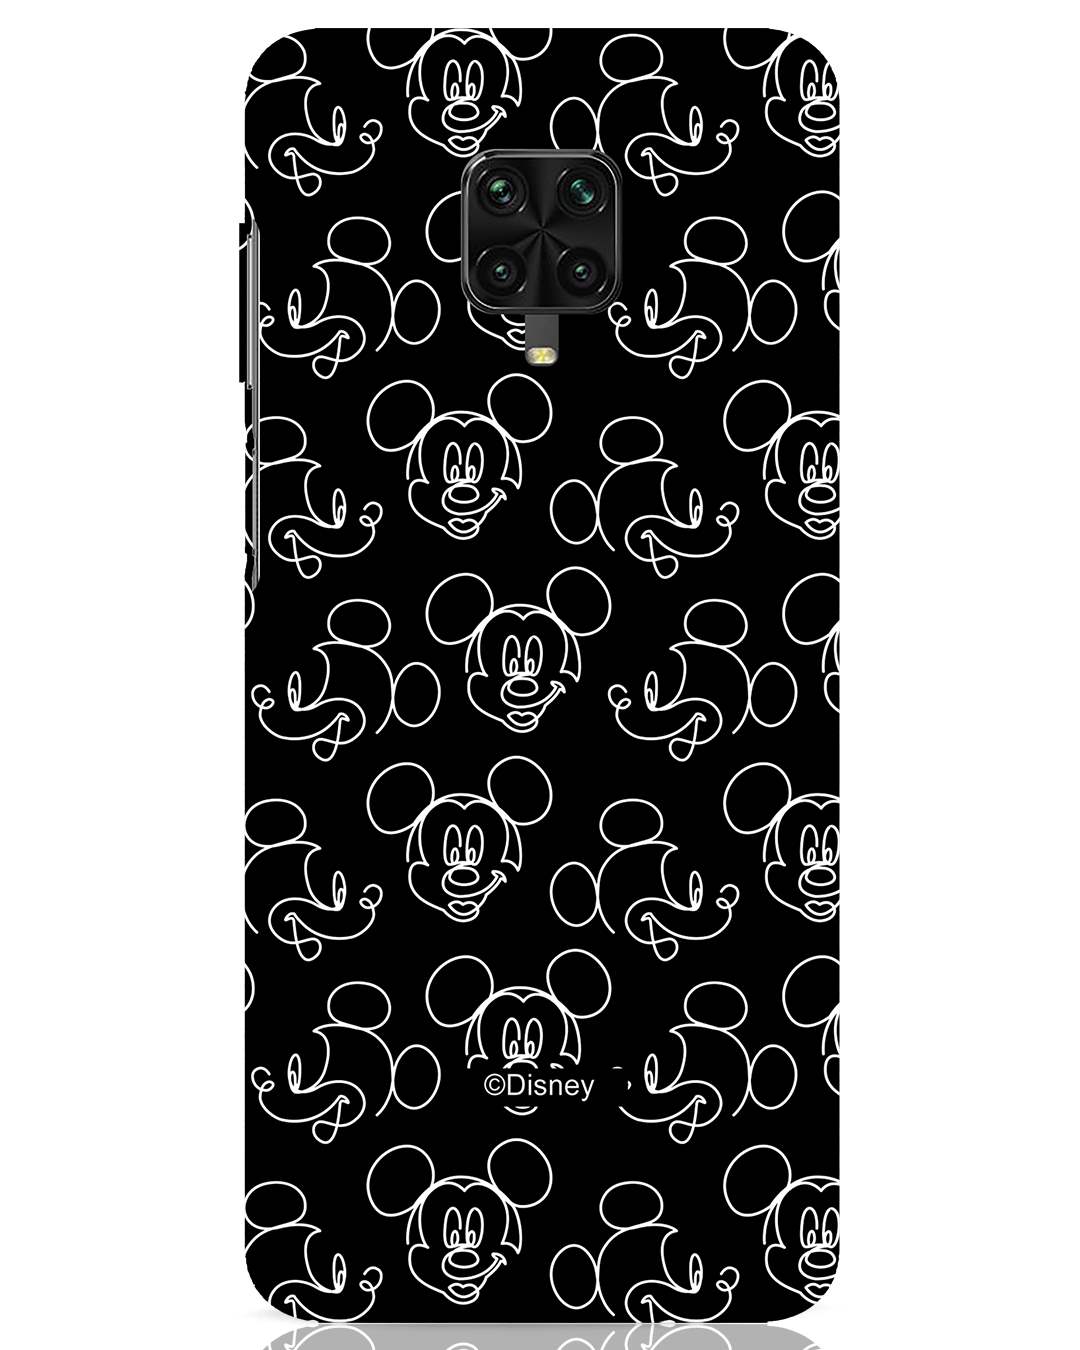 Buy Mickey Silhouette Xiaomi Poco M2 Pro Mobile Cover Dl Online In India At Bewakoof 0074